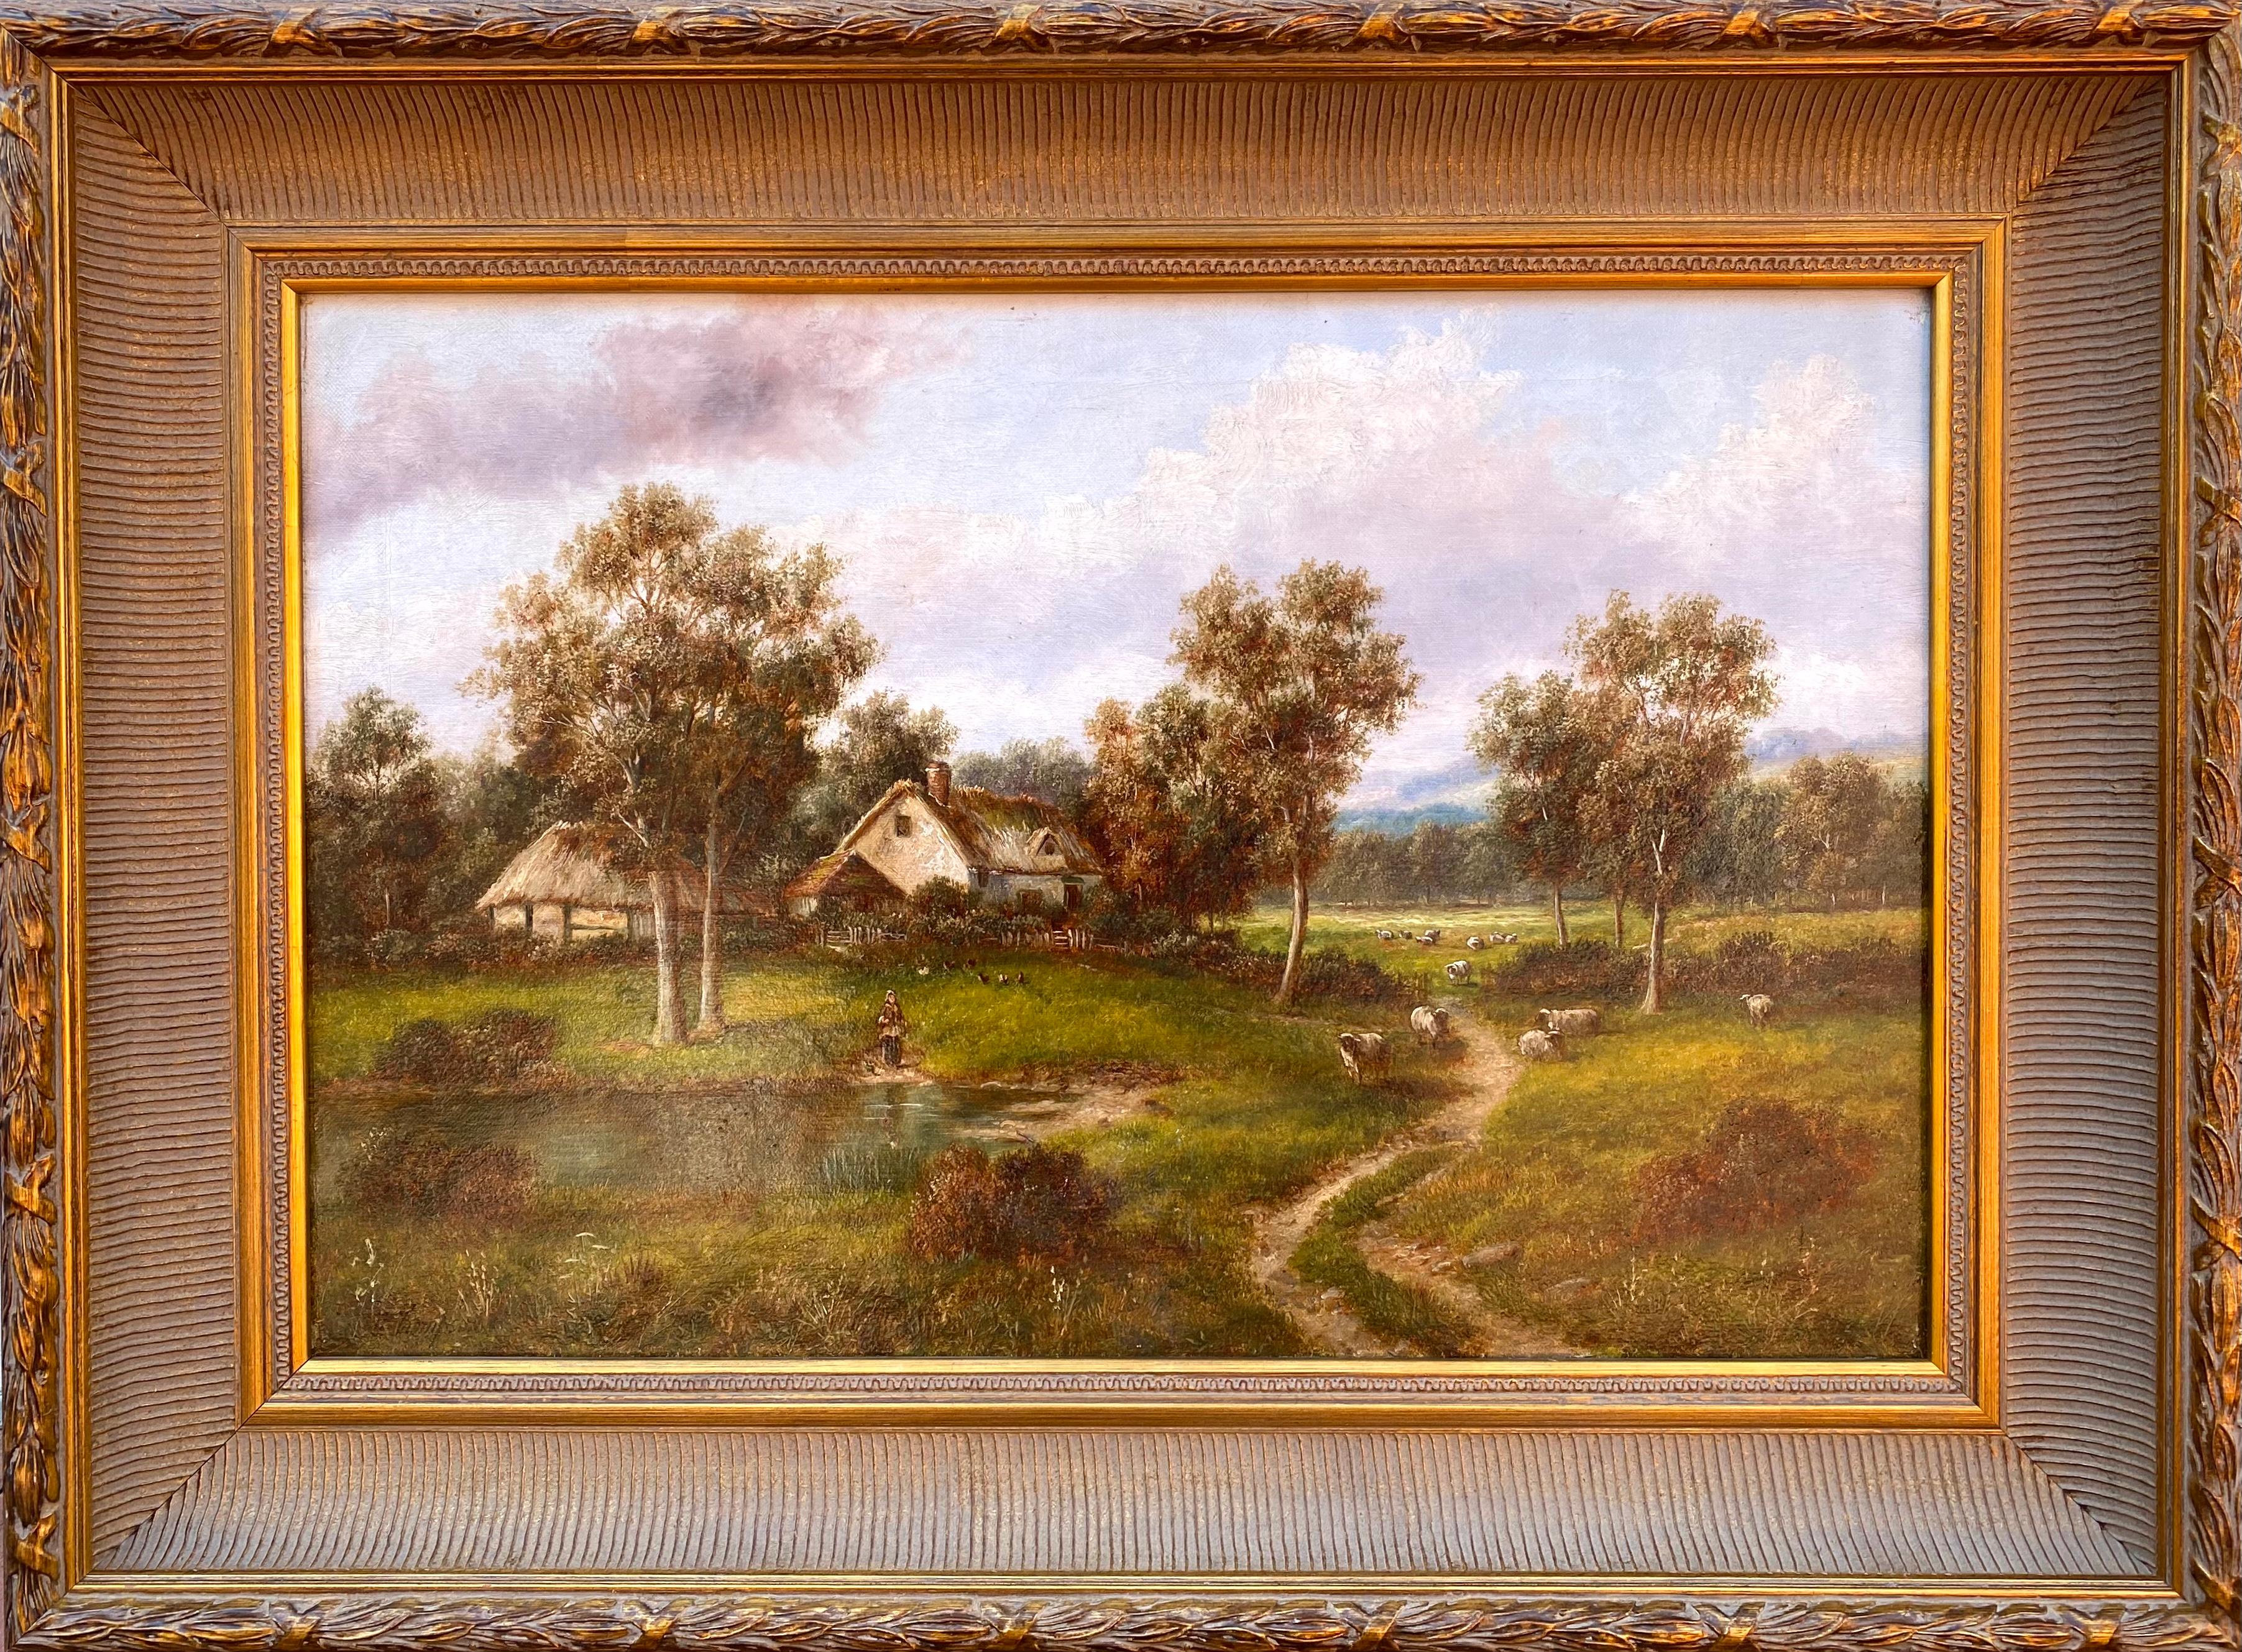 Beautiful oil on canvas bucolic cottage with sheep and chickens.  Signed lower left.  Circa 1890.  Nicely framed in a reproduction cove frame with a bronze antique finish. Overall framed measurements are 23 by 30.75 inches.

Gabriel Thompson was a